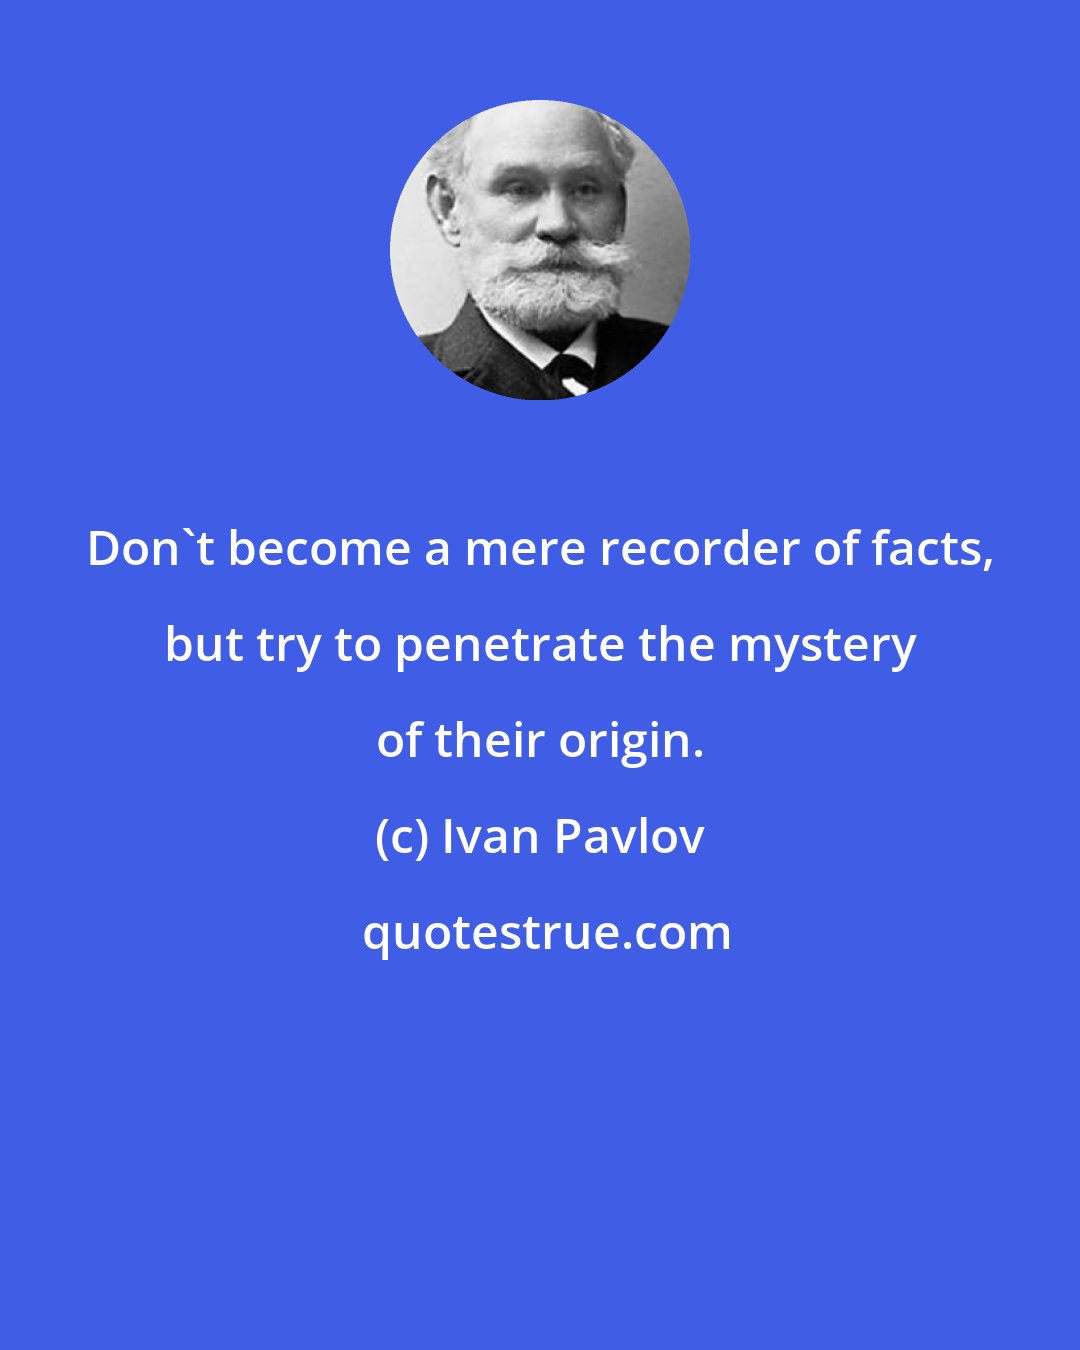 Ivan Pavlov: Don't become a mere recorder of facts, but try to penetrate the mystery of their origin.